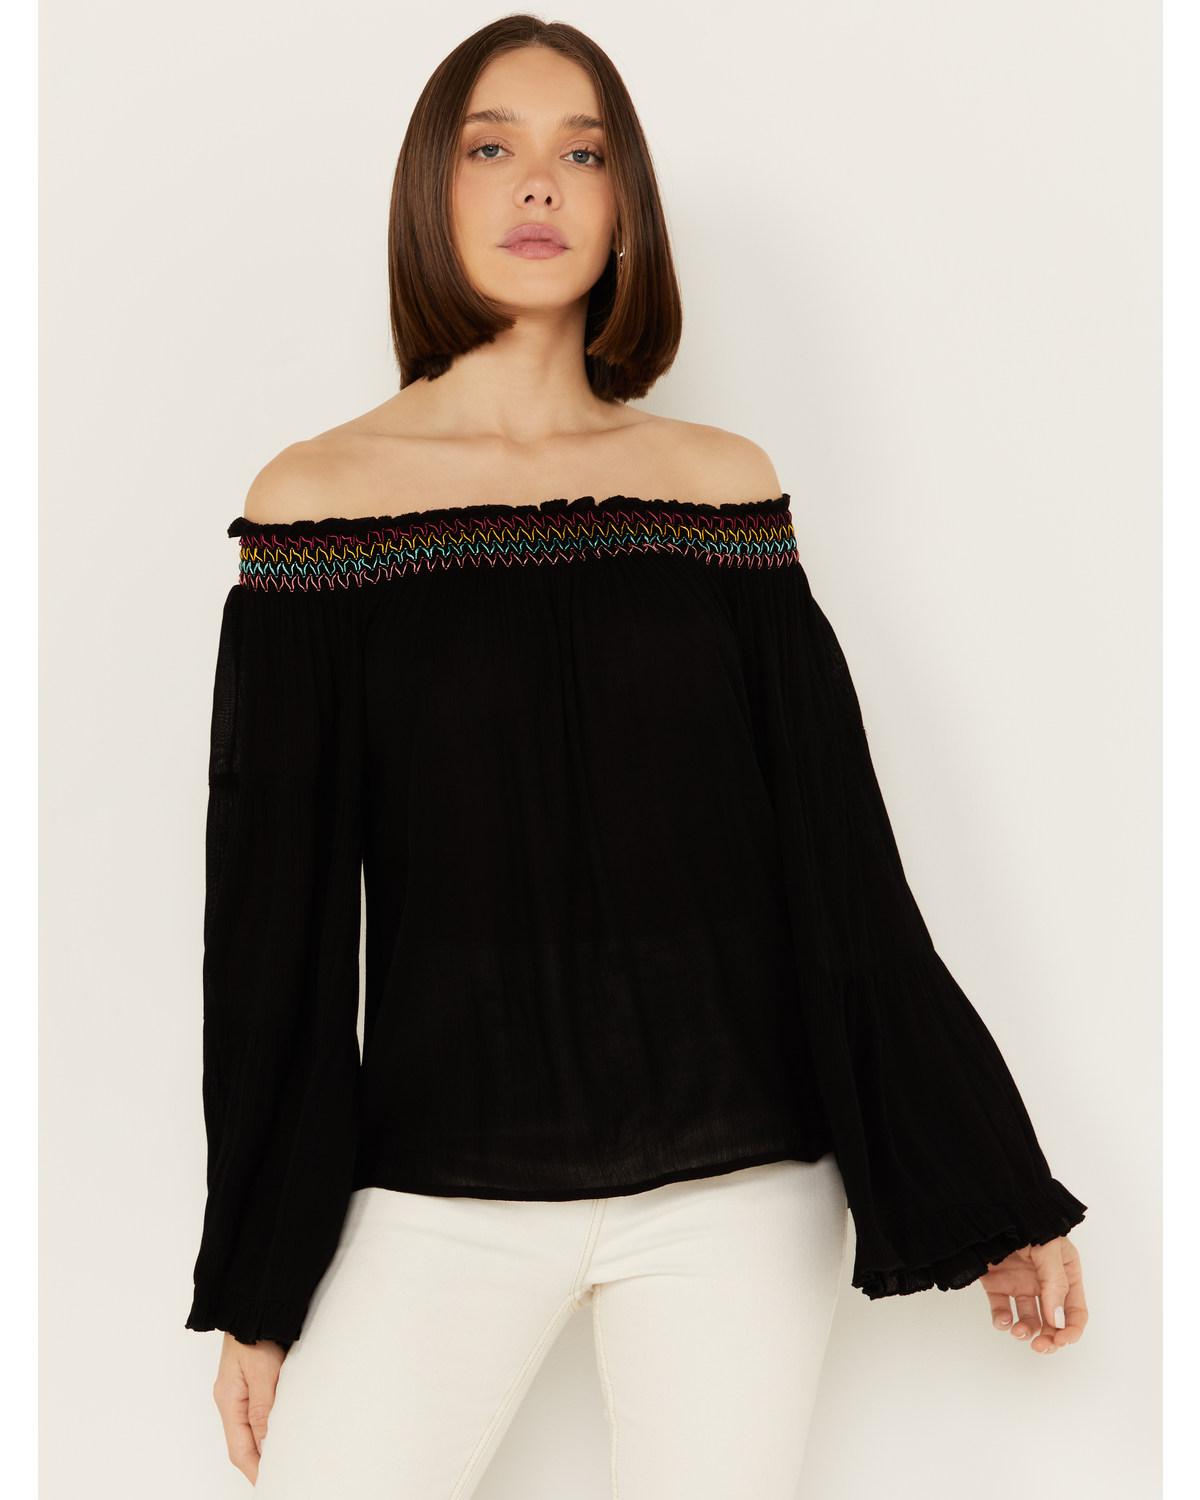 Panhandle Women's Embroidered Off the Shoulder Long Sleeve Top